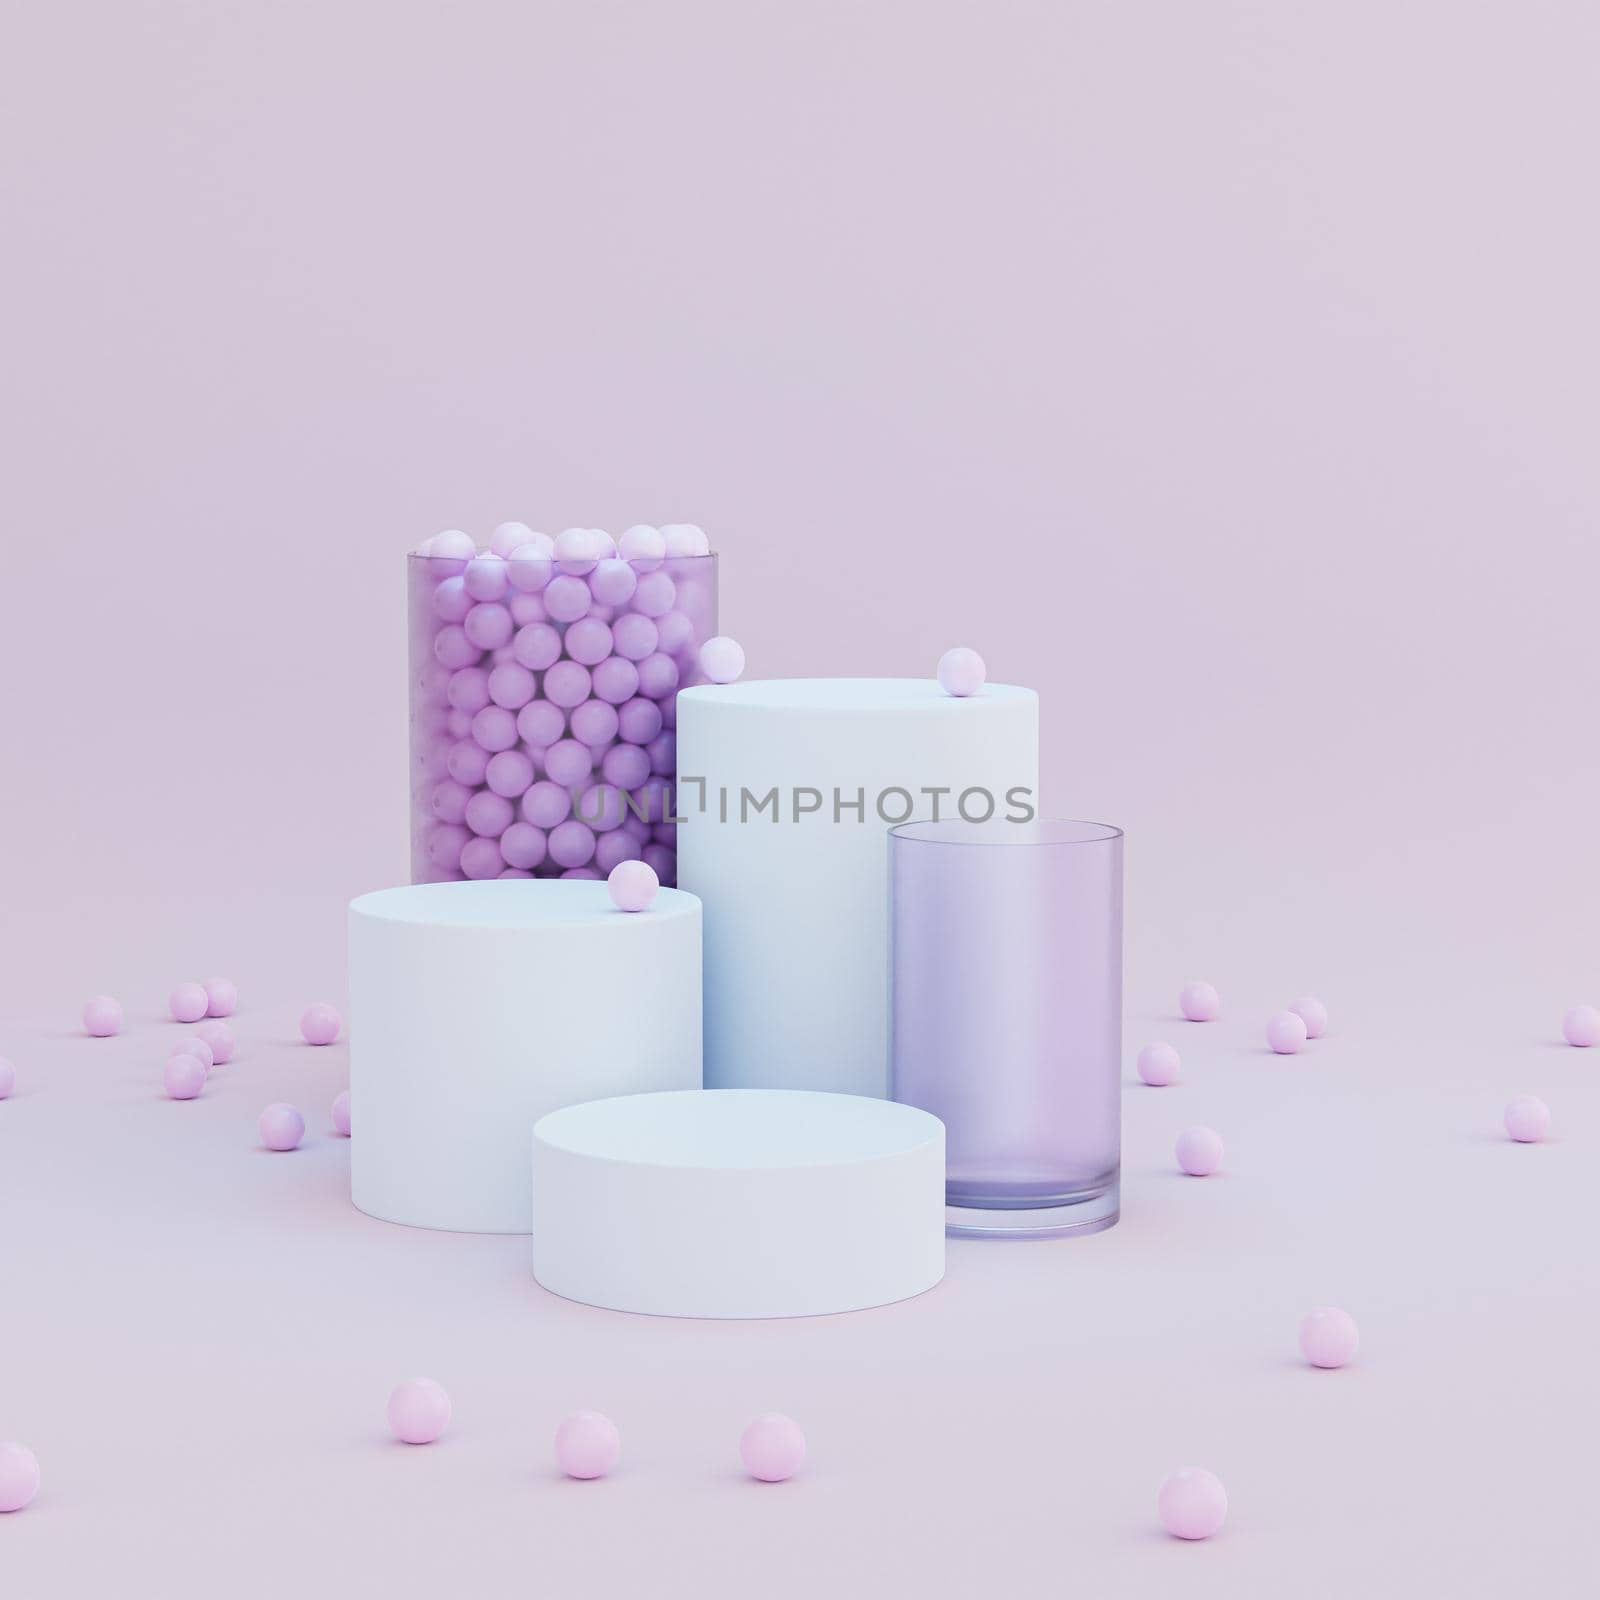 Cylinder shaped podiums or pedestals for products or advertising on pastel pink background, minimal 3d illustration render by Frostroomhead